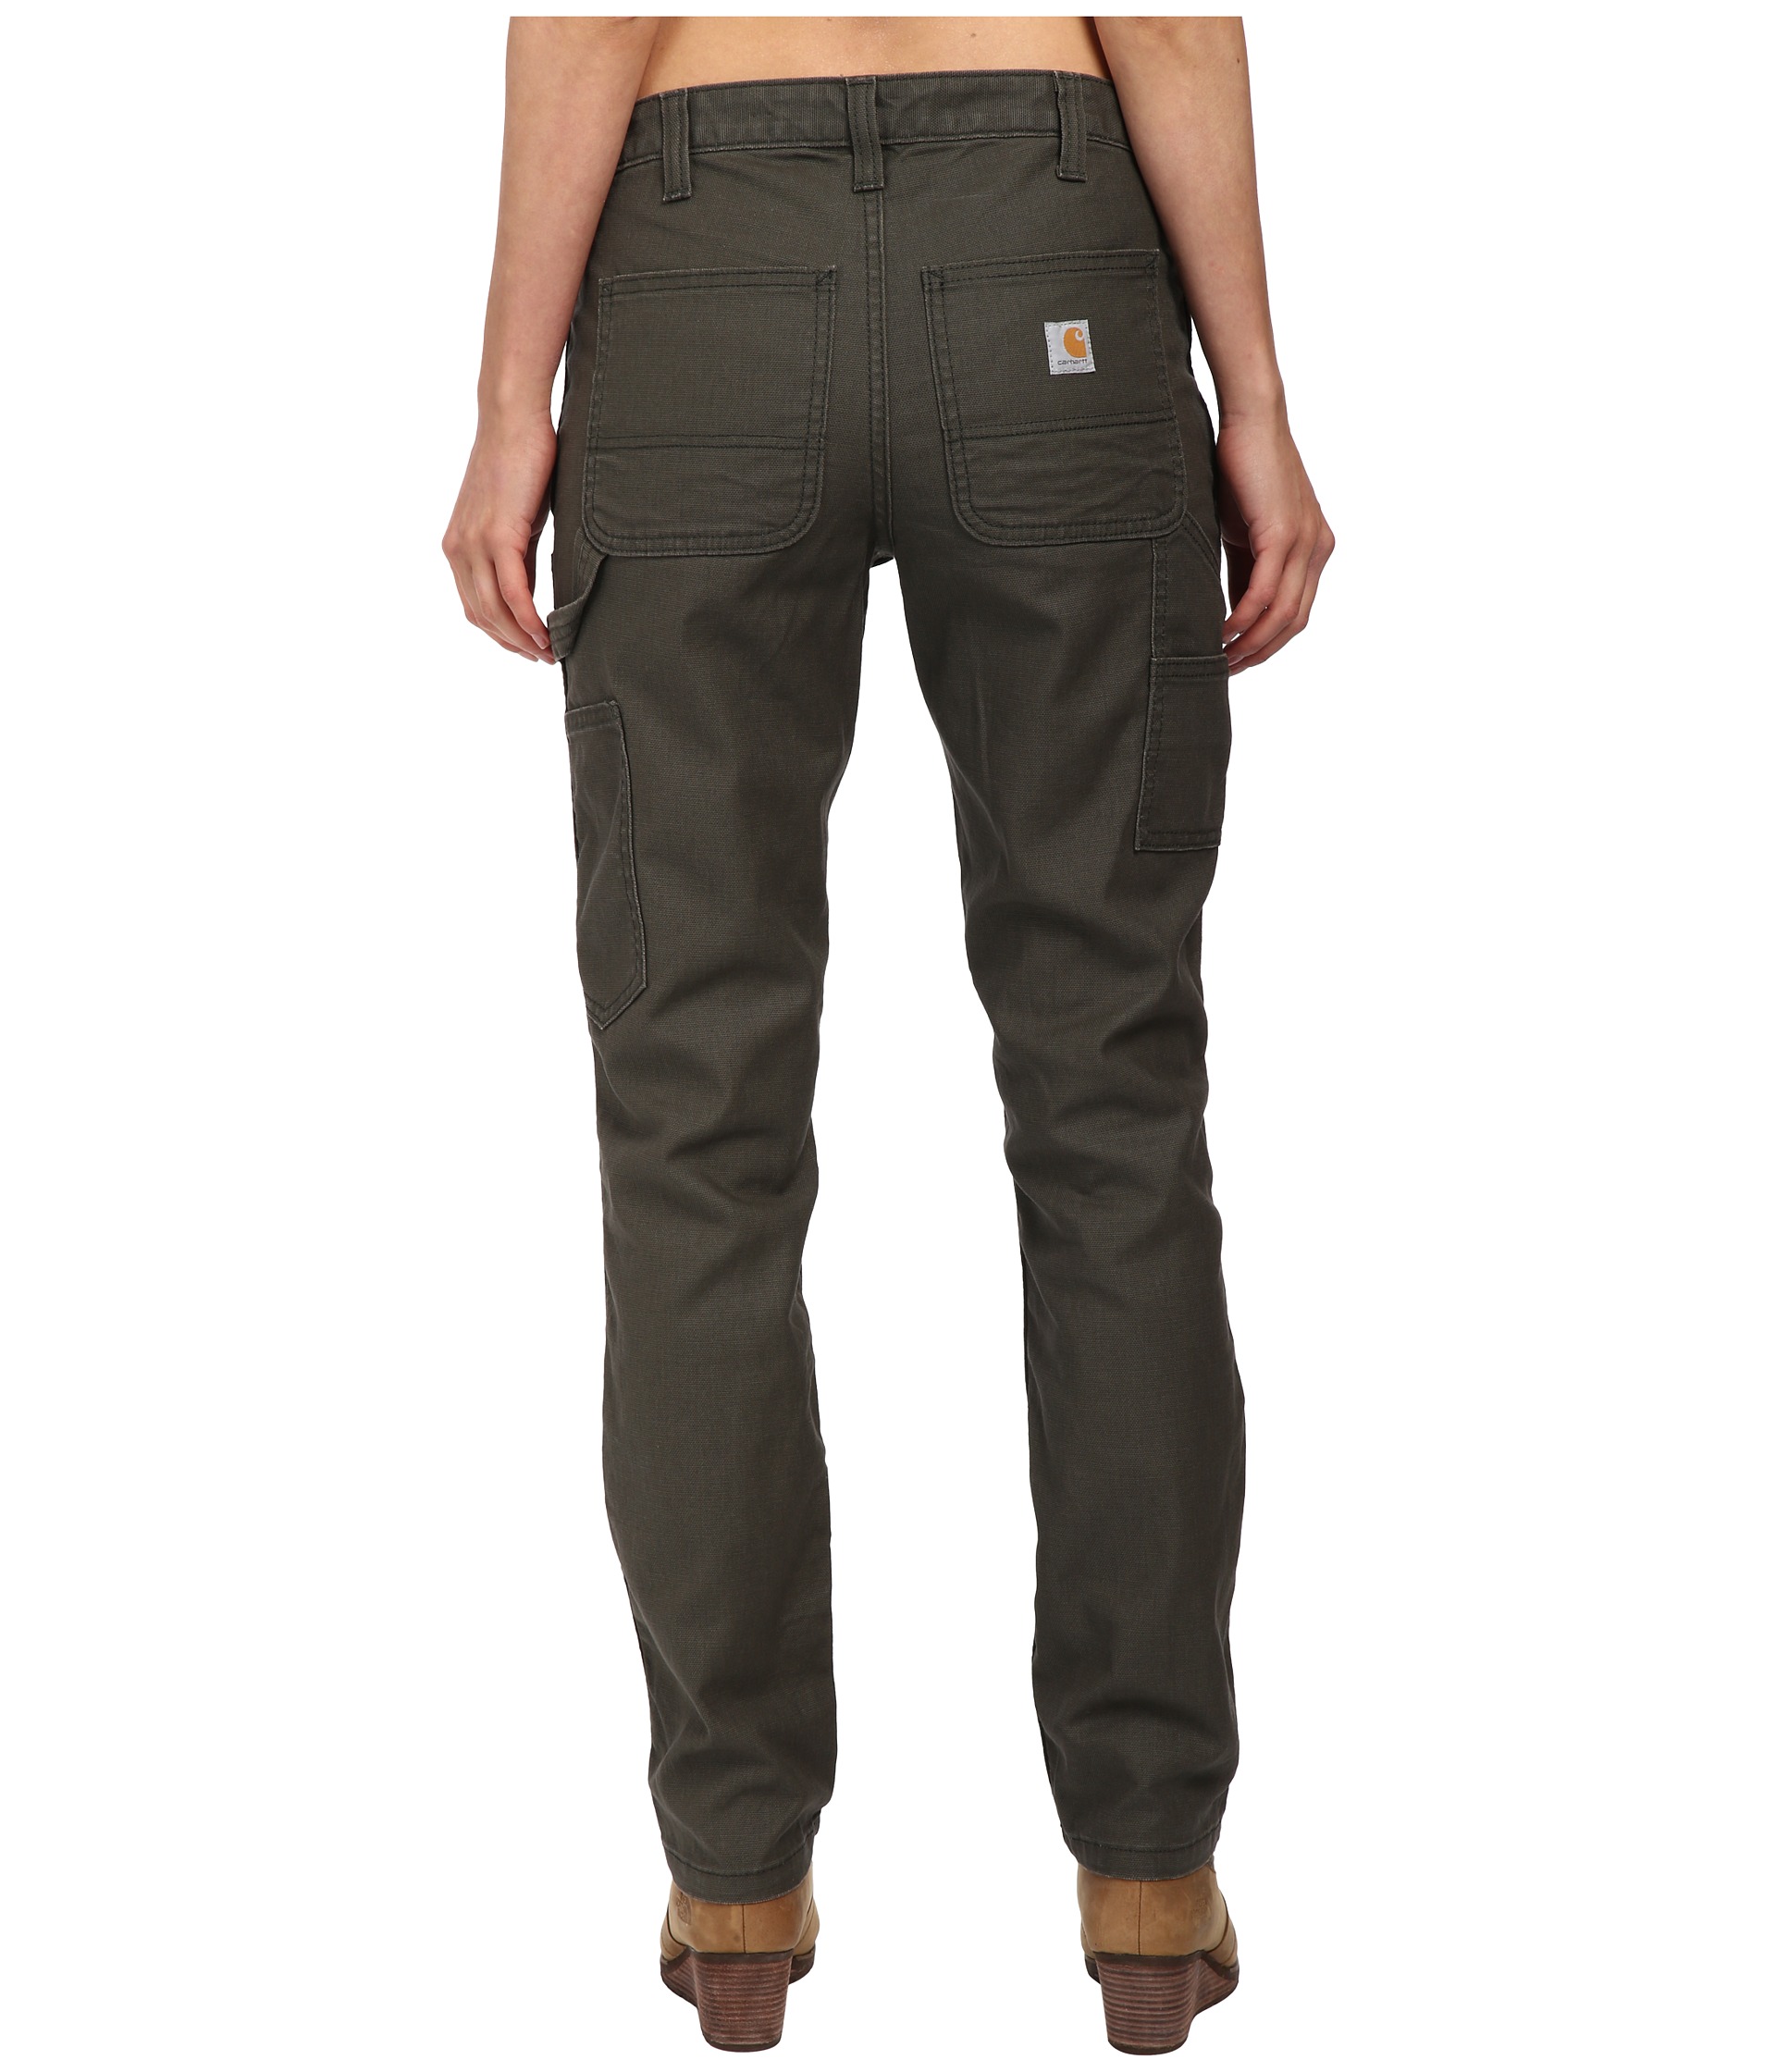 Carhartt Slim Fit Double-Front Canvas Dungaree Jeans - Zappos.com Free ...